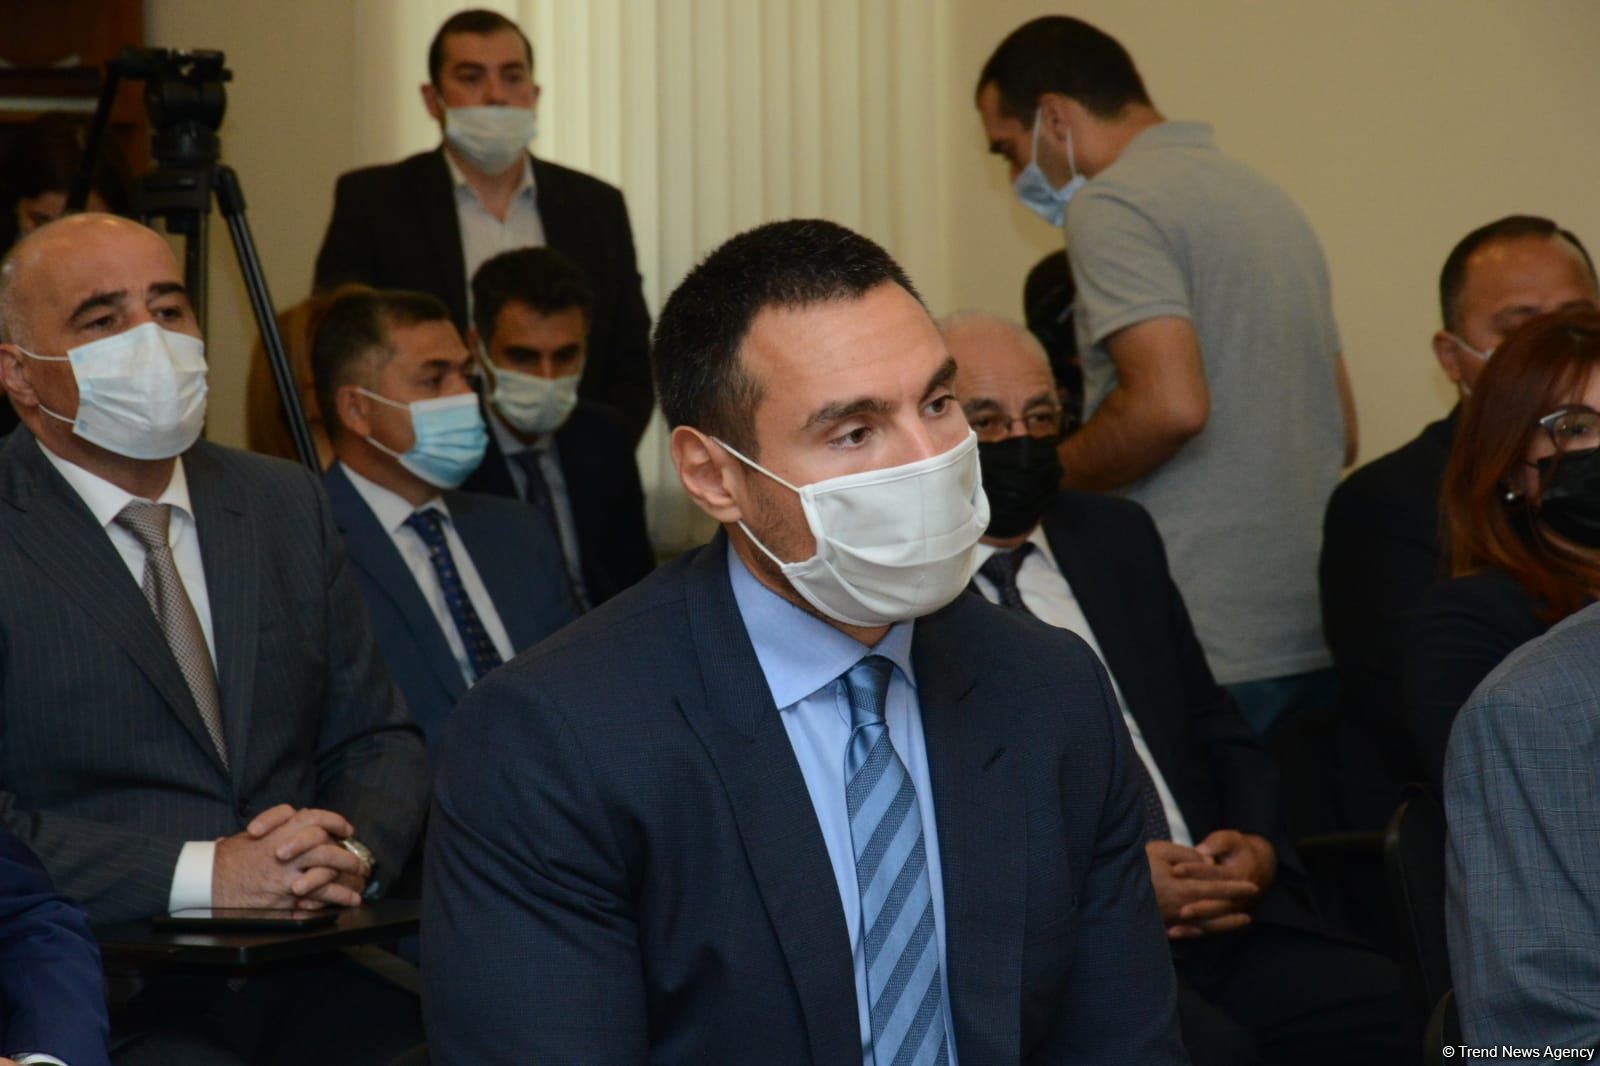 Azerbaijan's newly-appointed Minister of Youth and Sports introduced to ministry's staff (PHOTO)